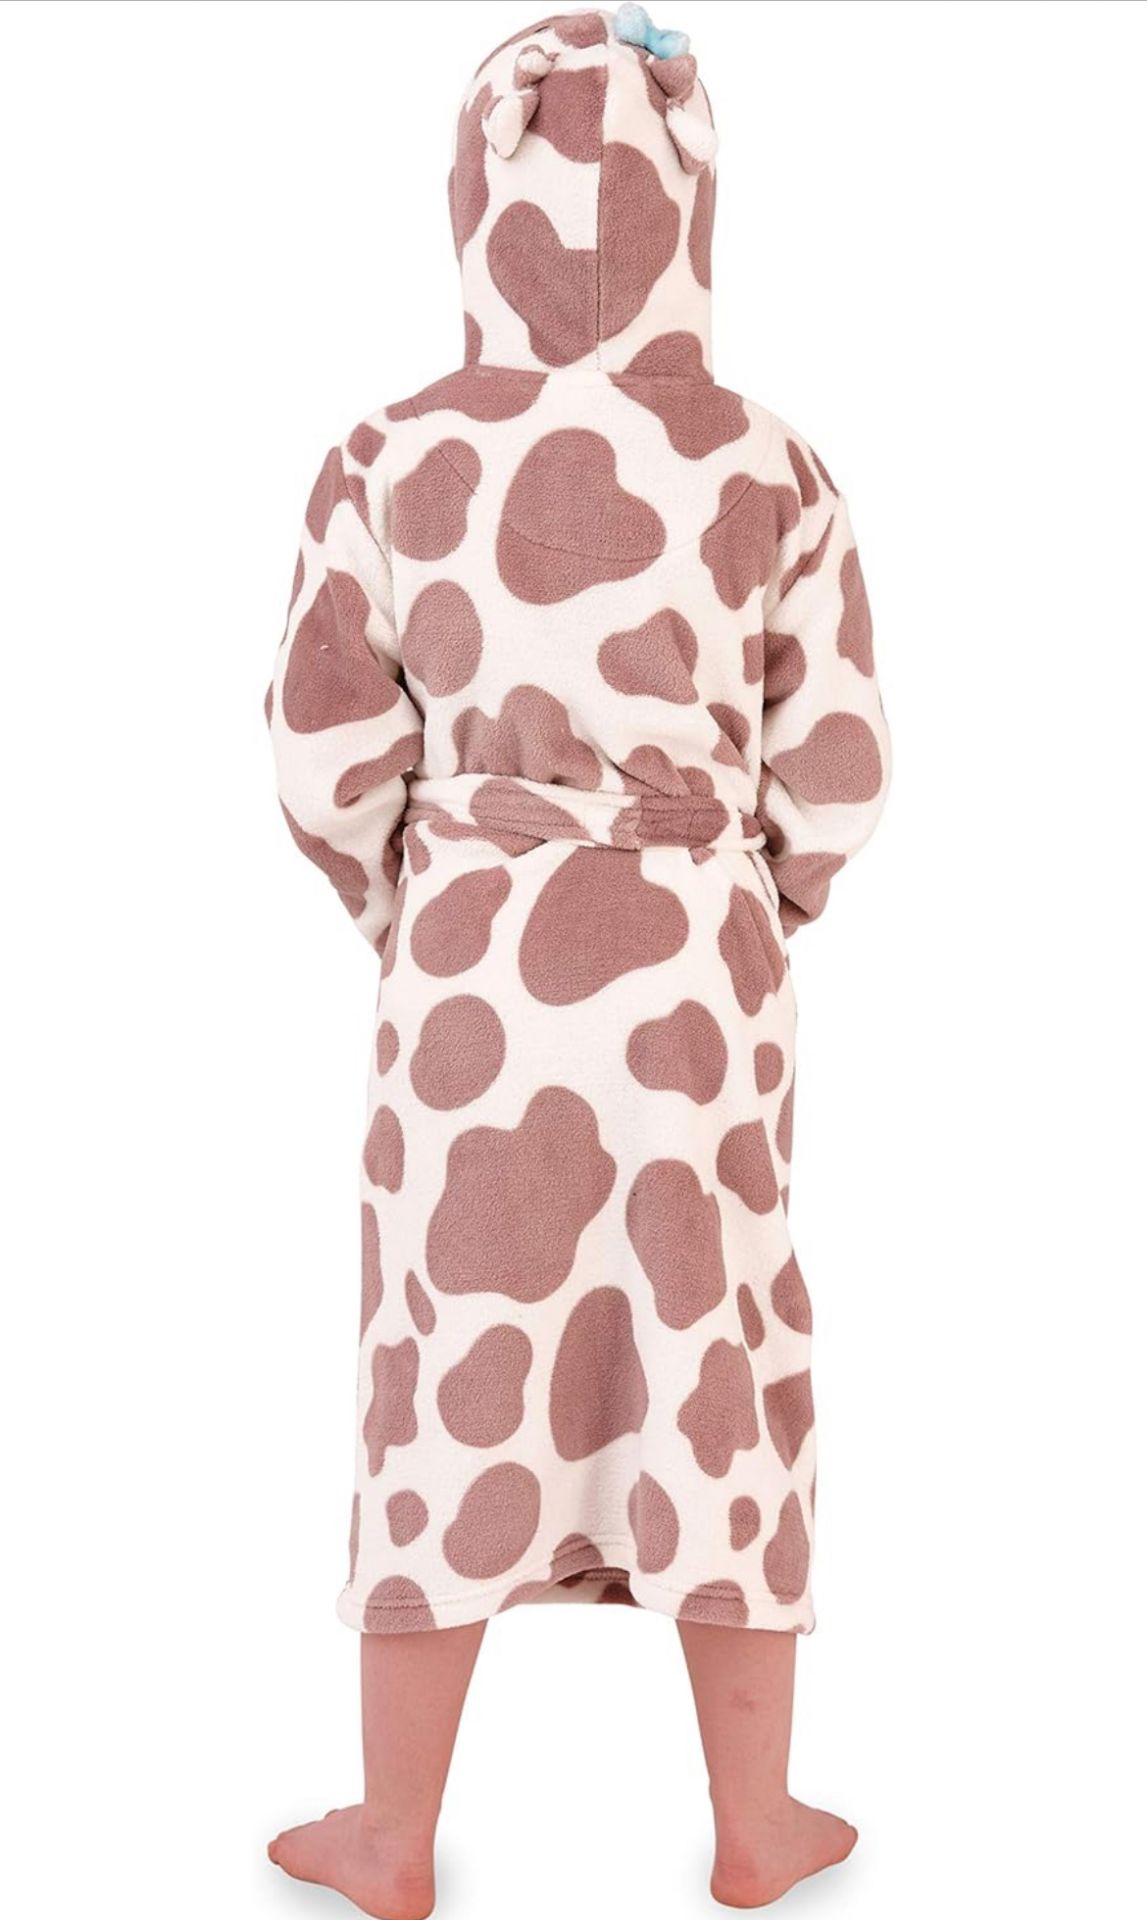 15 x Kid's Cow Dressing Gowns - Image 2 of 2